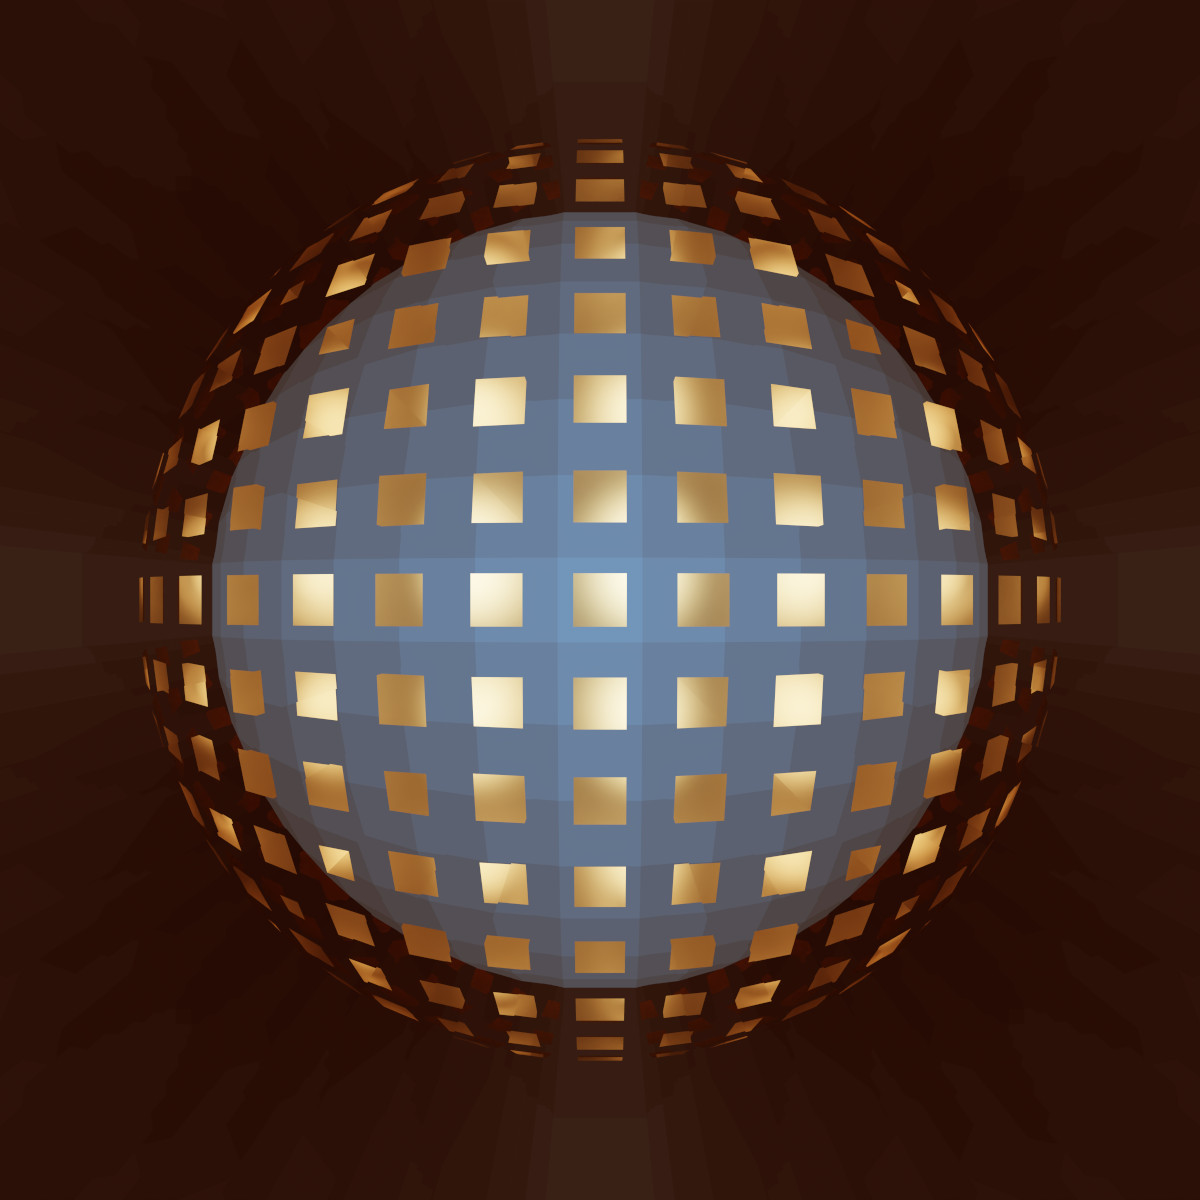 Virtual abstract scenery, Abstract digital art, Raytracing, Computer-rendered image, 2022. A golden square appears in many reflections forming a seemingly perfect sphere.